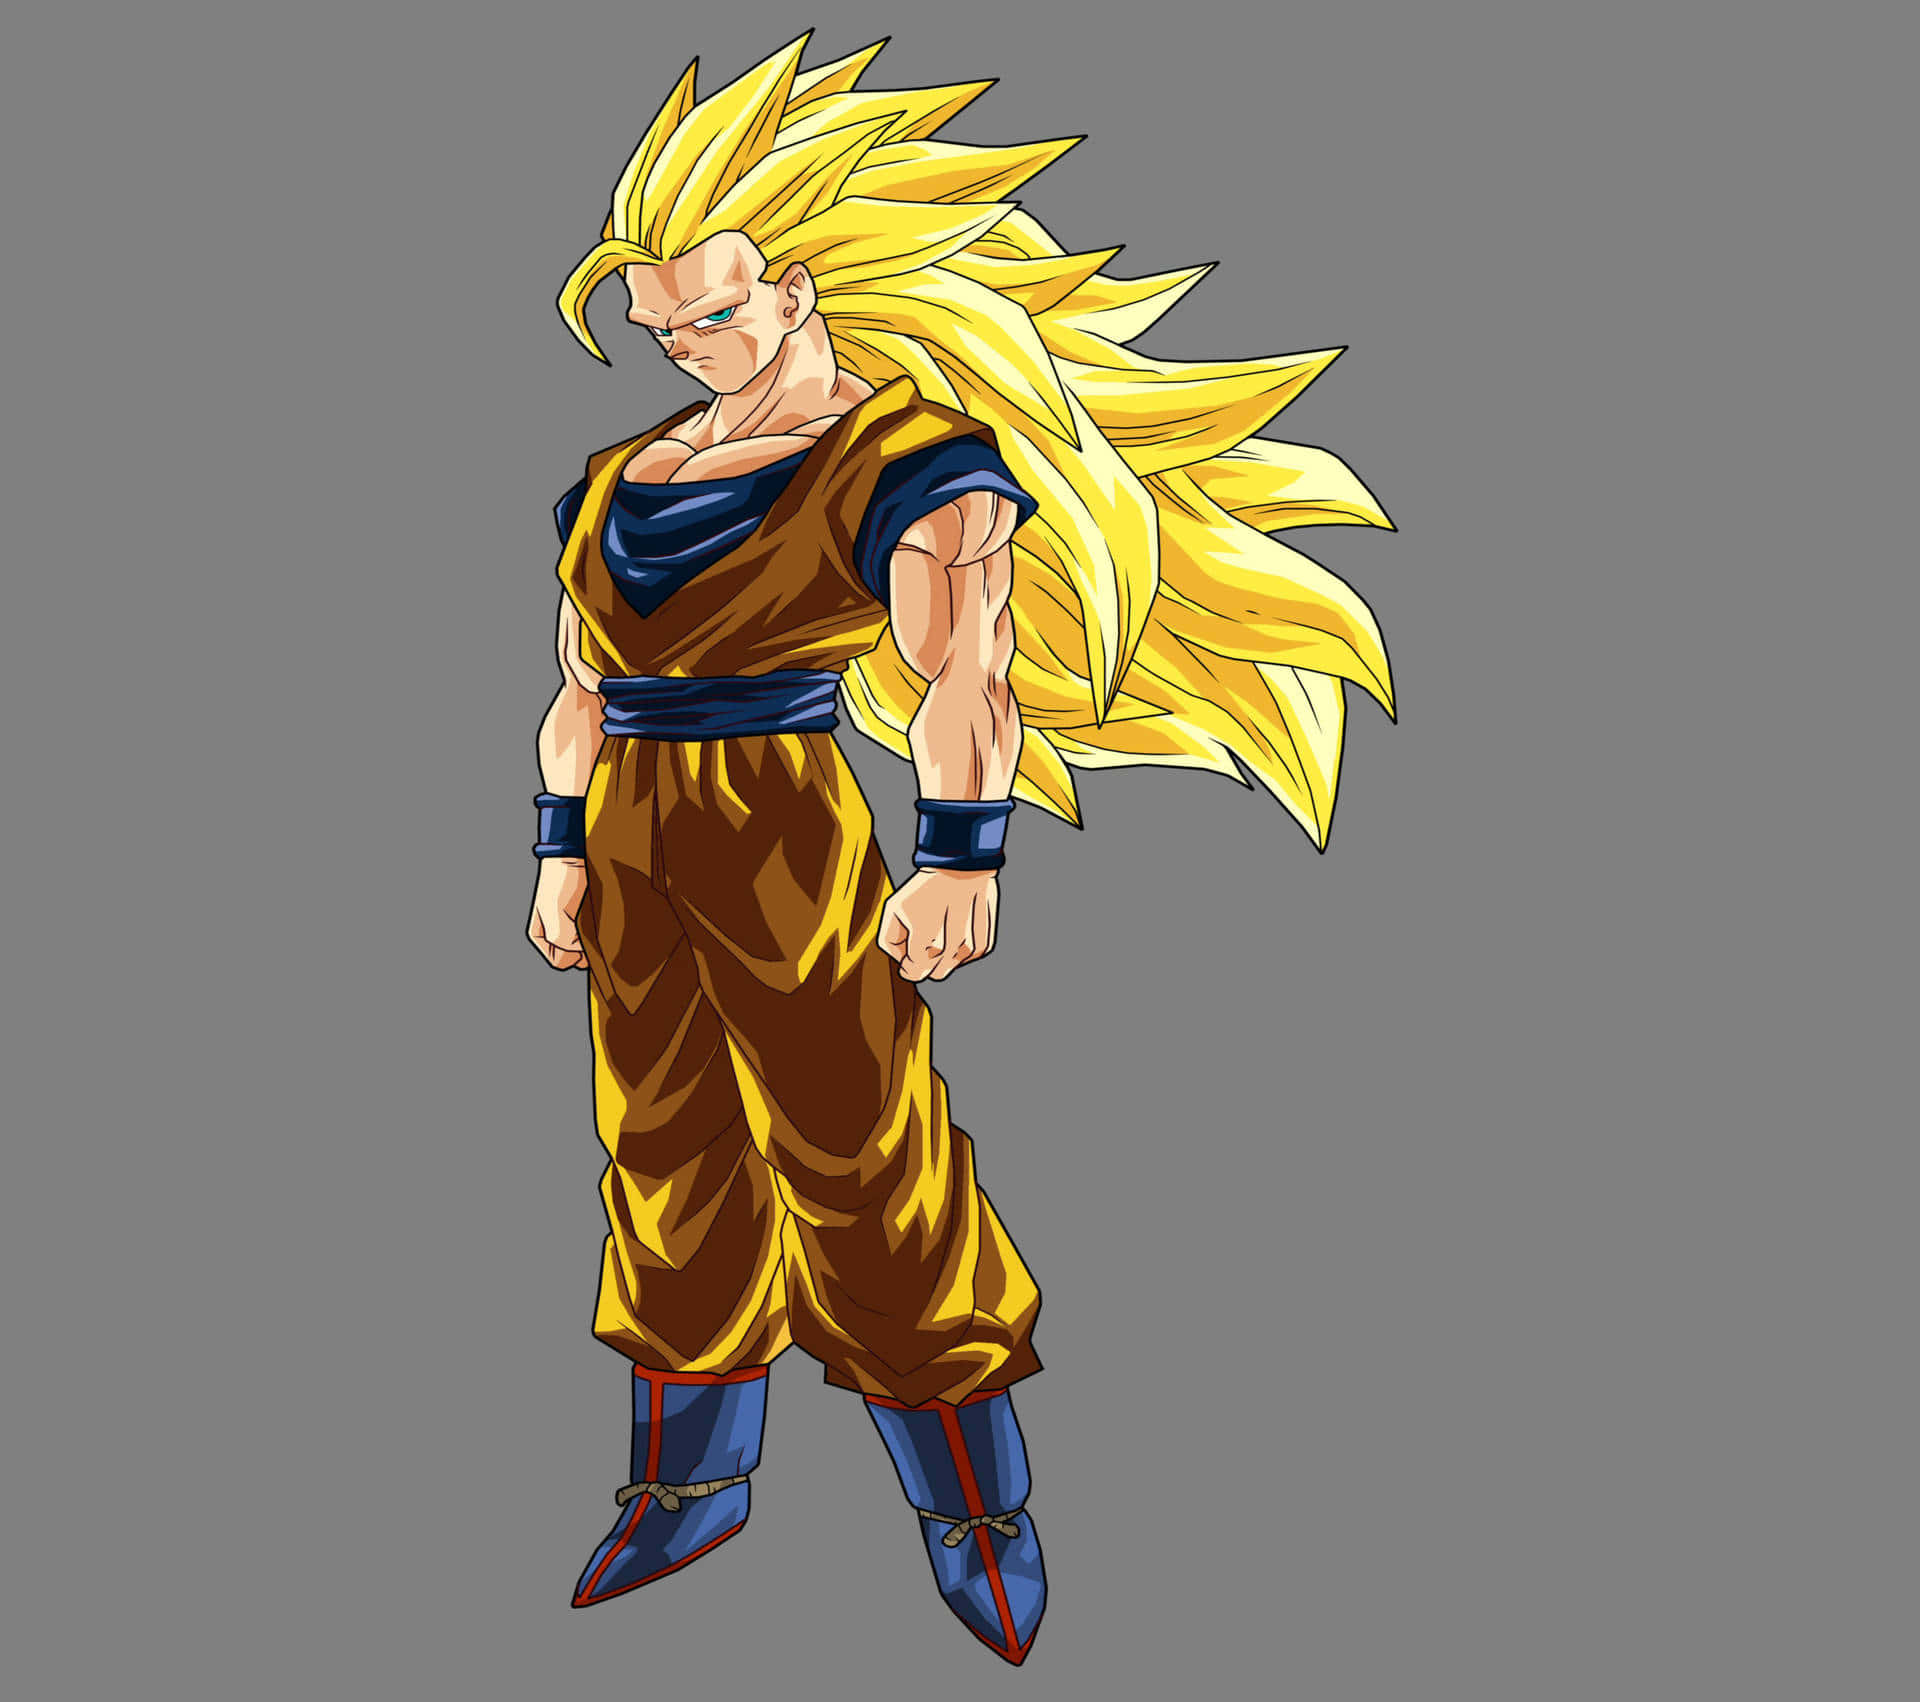 Super Saiyan 3 Goku Transforms and Unleashes His Unmatched Power Wallpaper